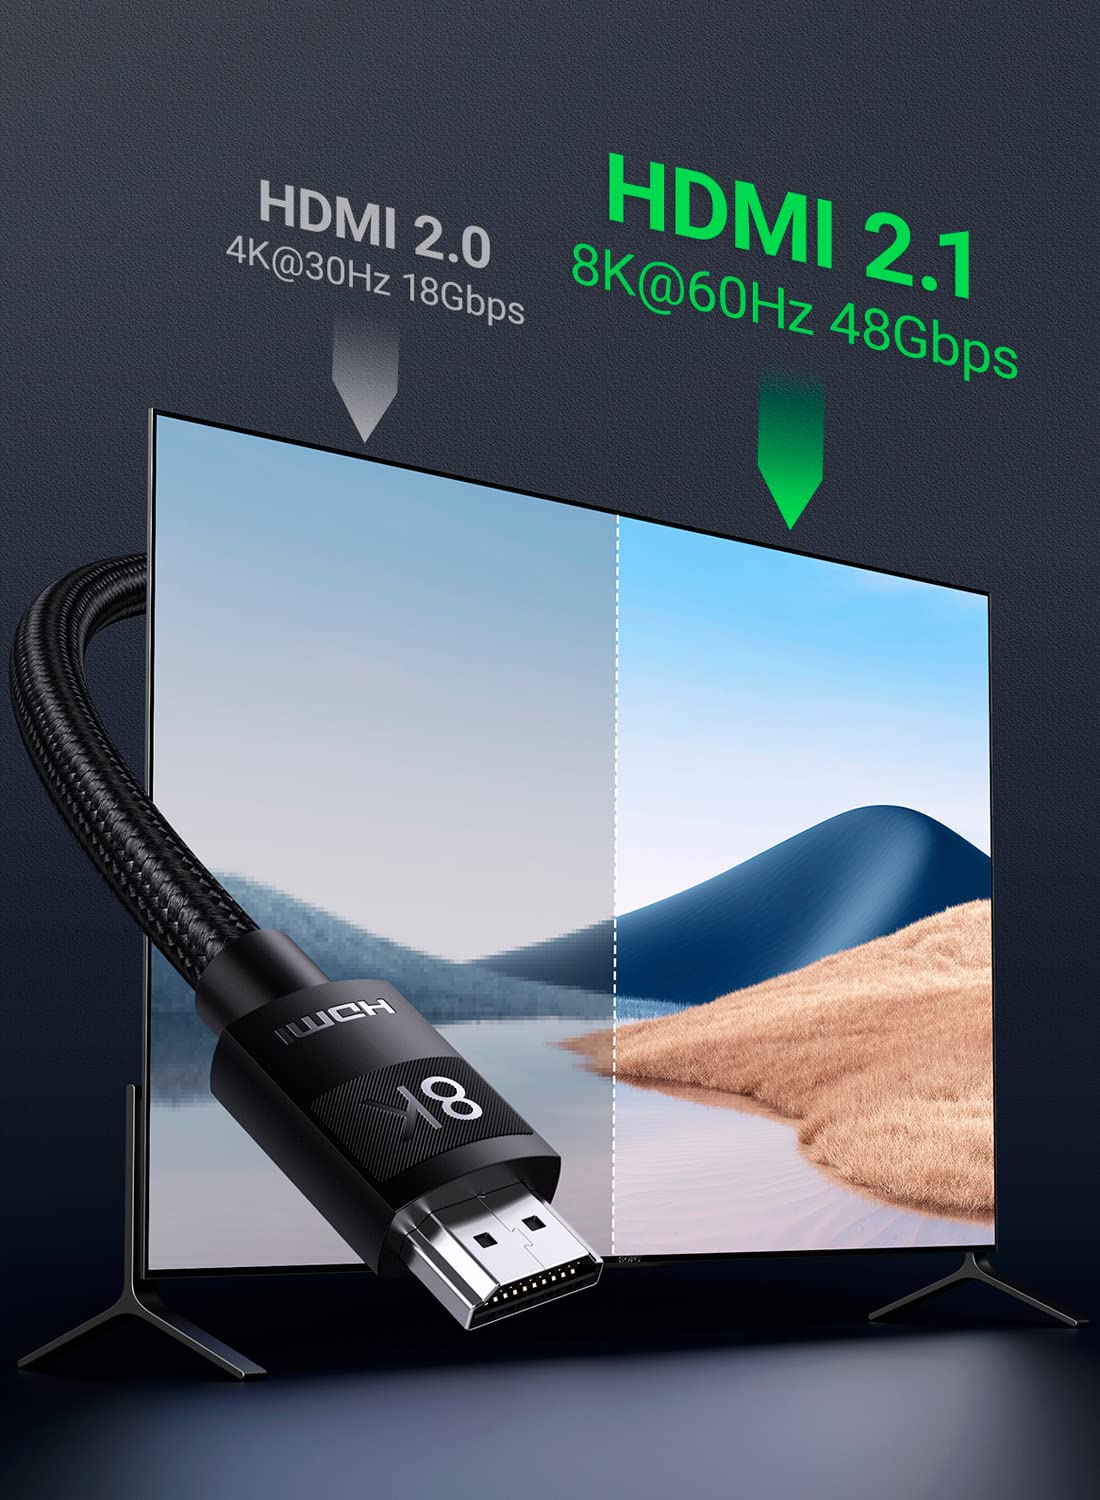 UGREEN 8K Certified HDMI 2.1 Cable 4K 240Hz, 48Gbps HDMI Cable 2.1 Ultra  High Speed Support